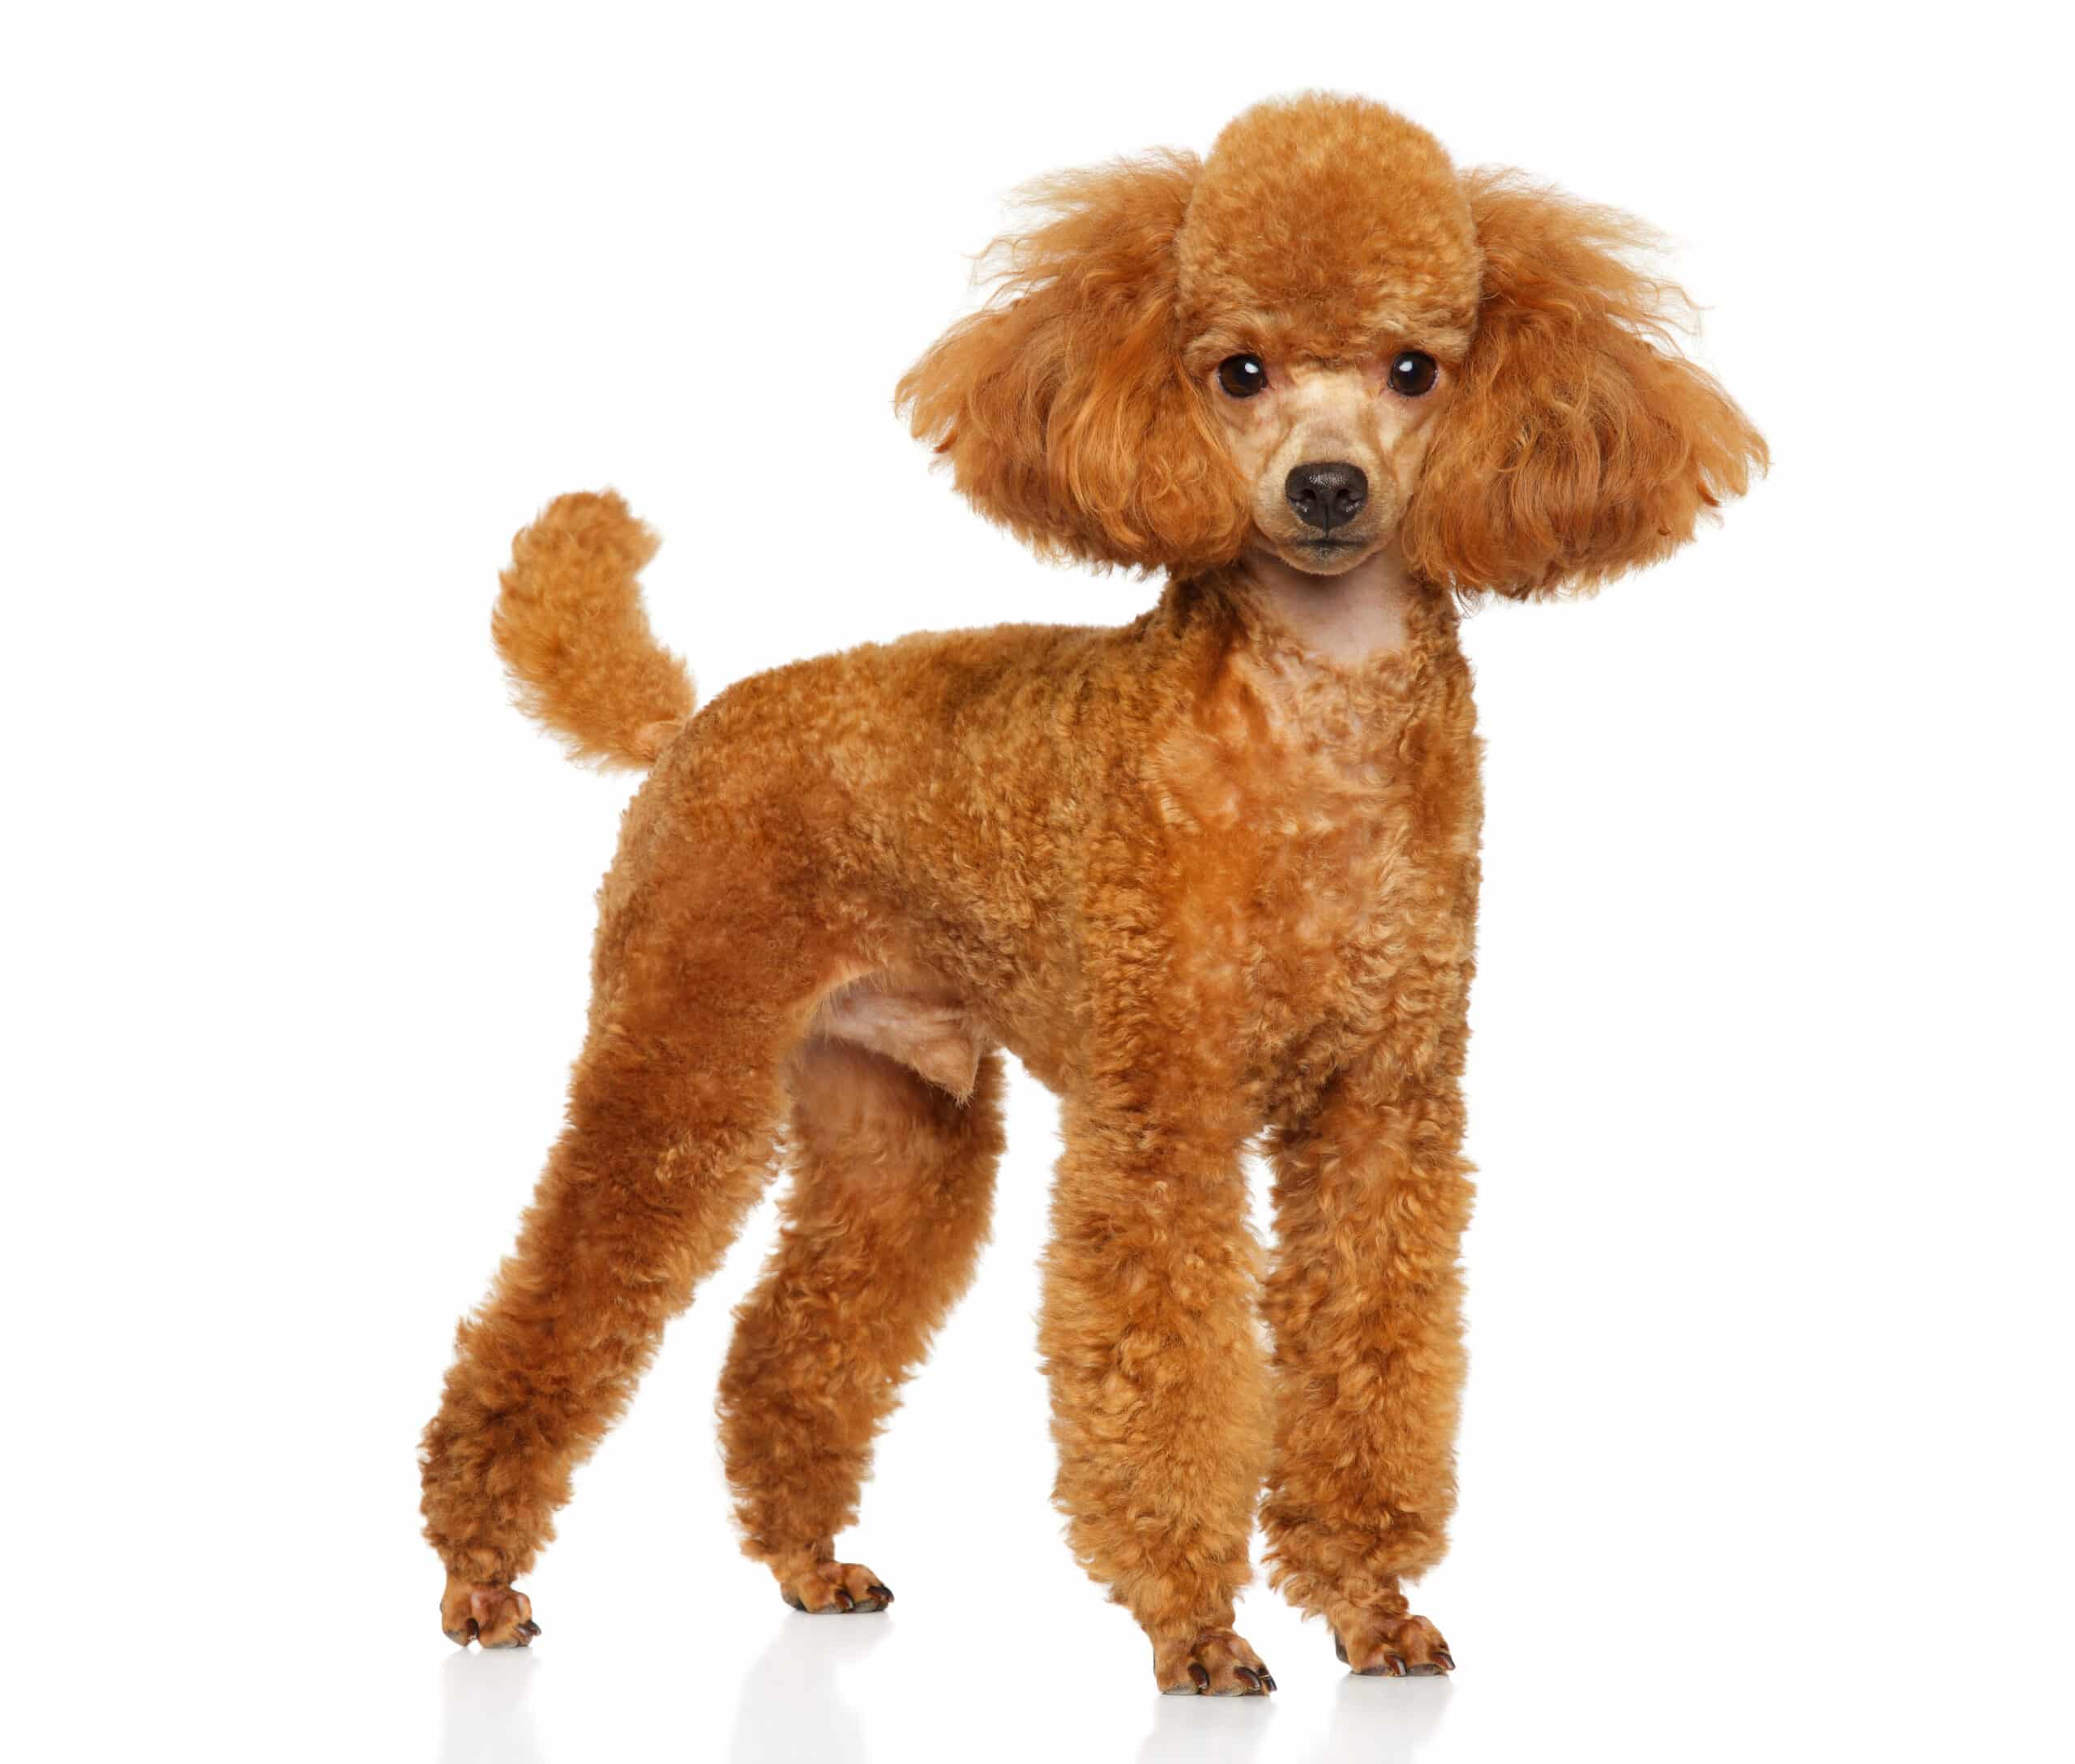 Are Poodles Easy To Housebreak